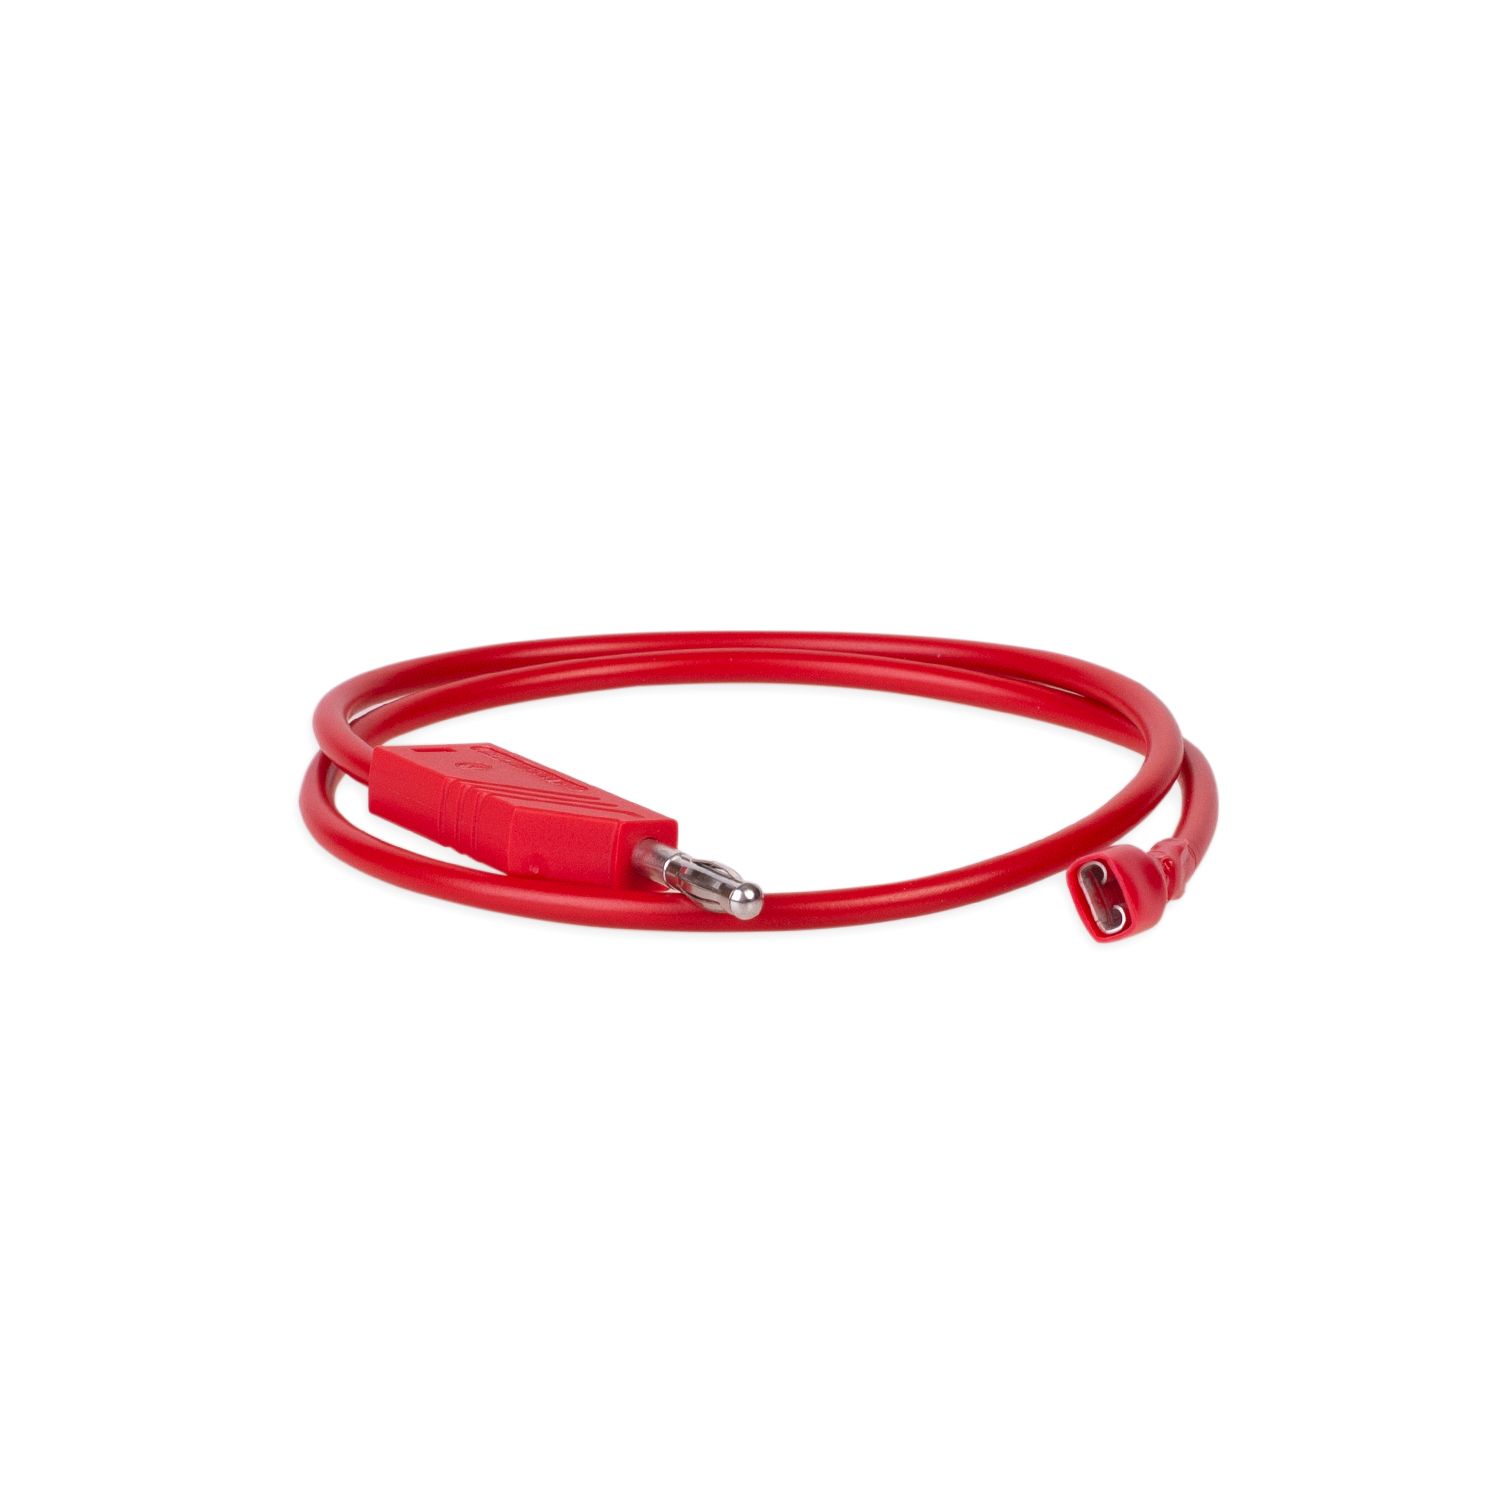 Cable rouge pour RMgo!/ RM01